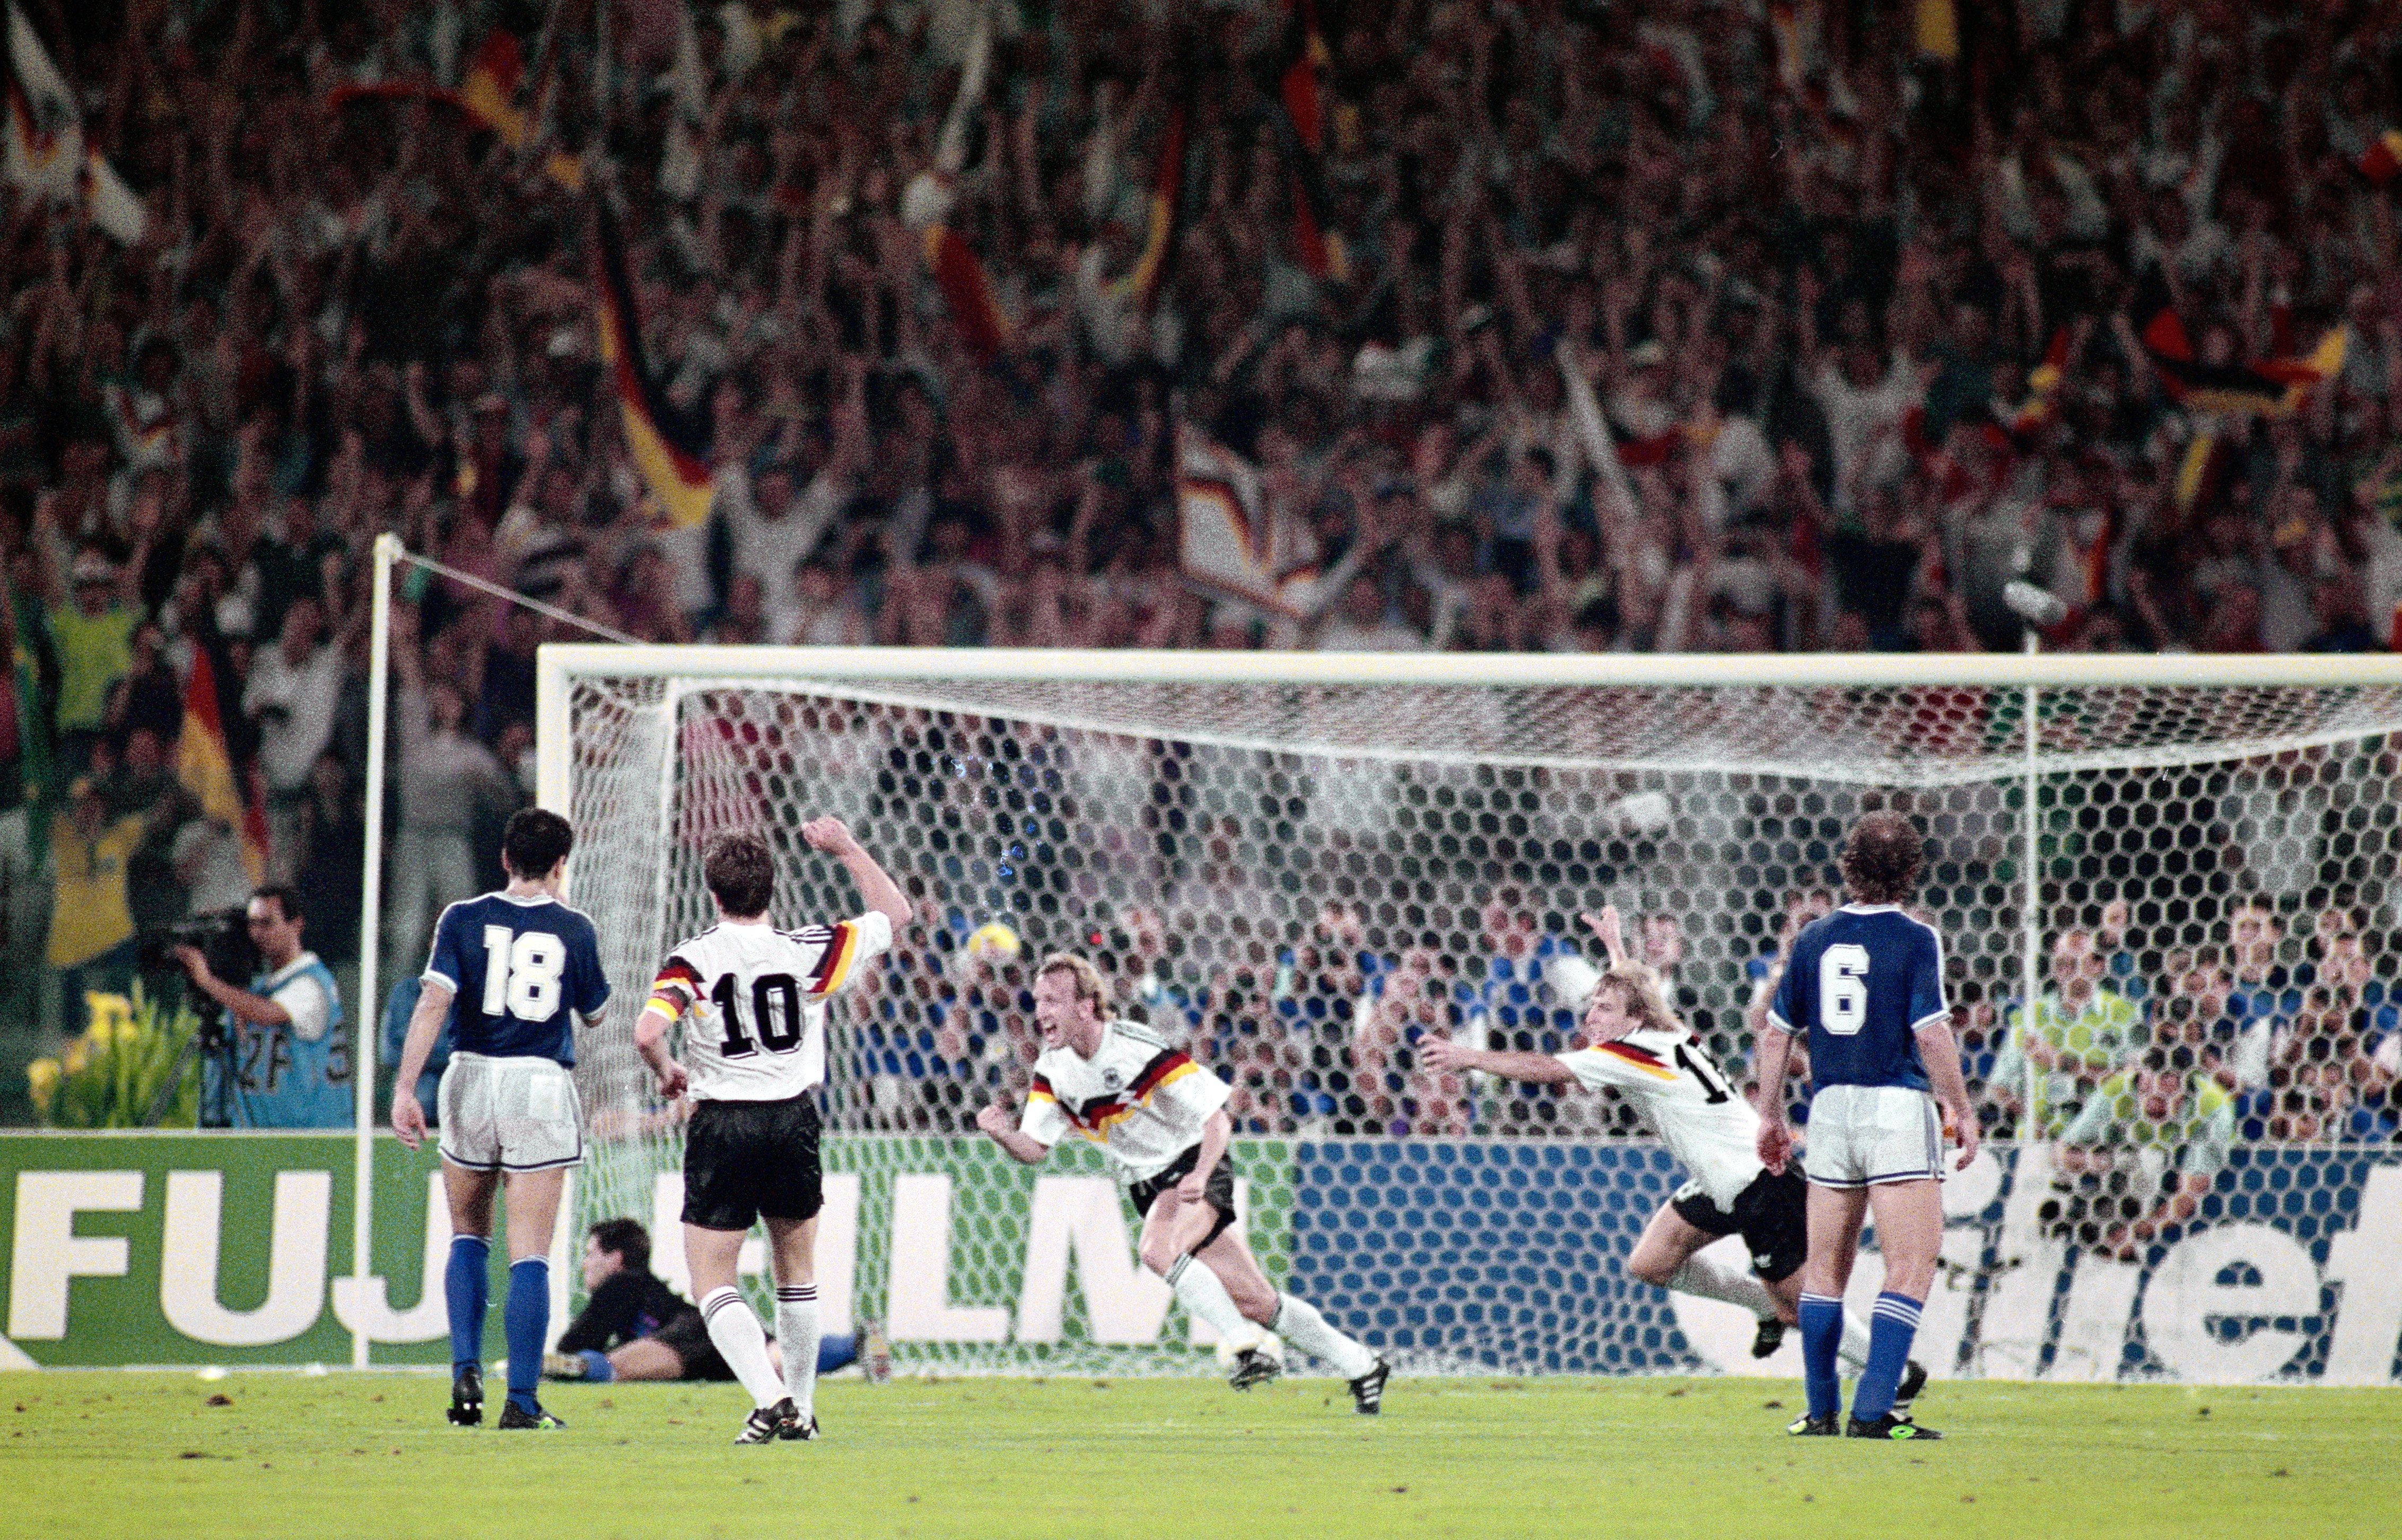 Looking back: Brehme’s 1990 World Cup winning goal 